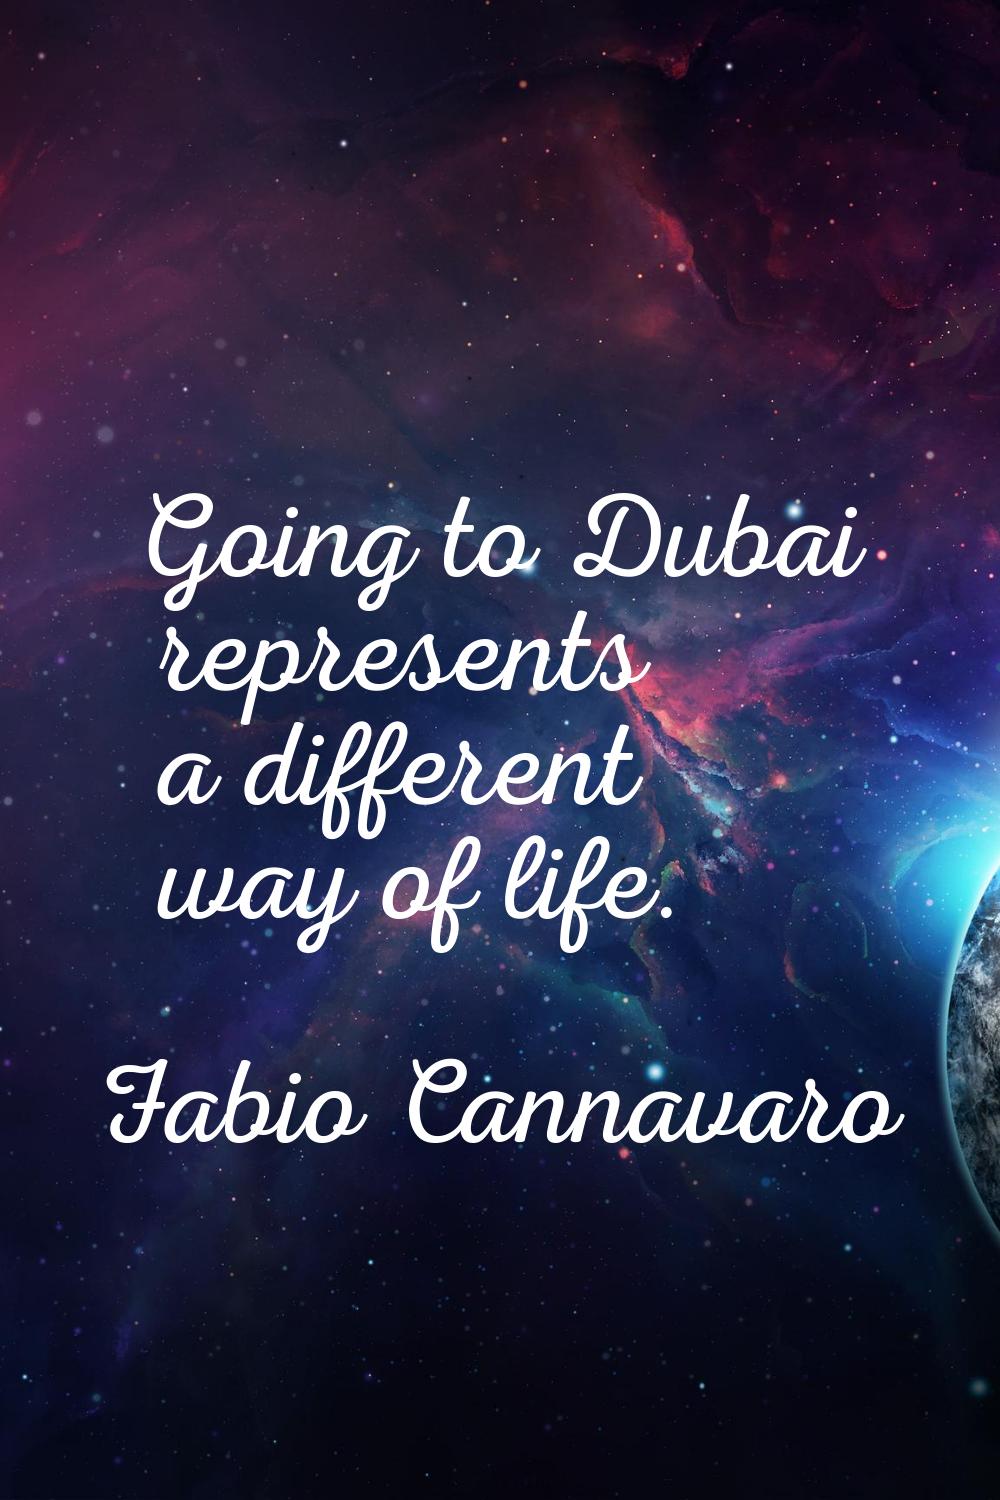 Going to Dubai represents a different way of life.